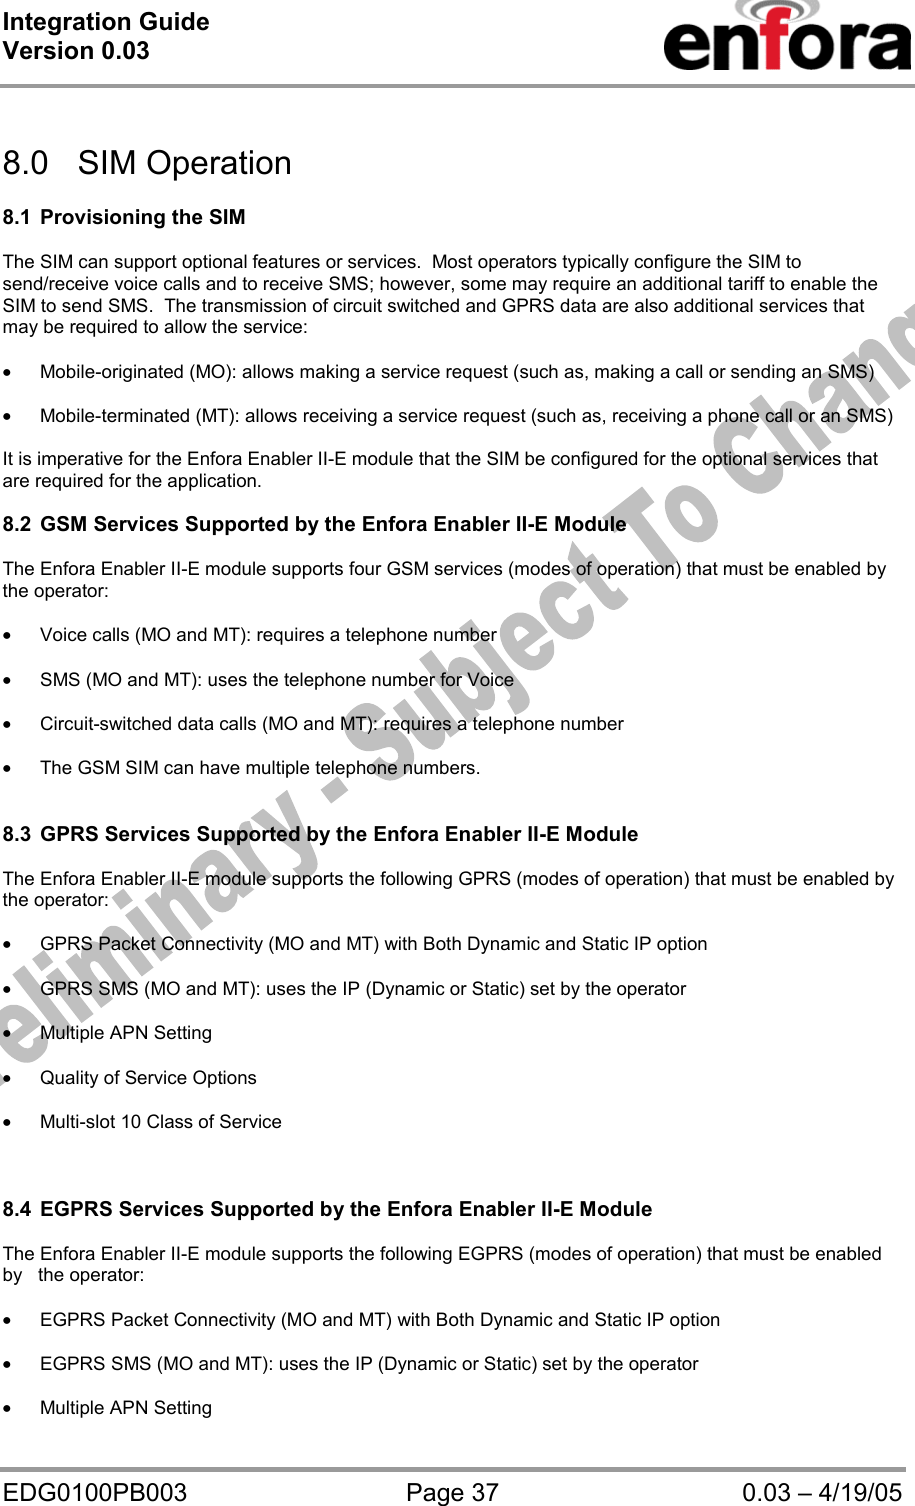 Integration Guide  Version 0.03   EDG0100PB003  Page 37  0.03 – 4/19/05   8.0 SIM Operation  8.1 Provisioning the SIM  The SIM can support optional features or services.  Most operators typically configure the SIM to send/receive voice calls and to receive SMS; however, some may require an additional tariff to enable the SIM to send SMS.  The transmission of circuit switched and GPRS data are also additional services that may be required to allow the service:  • Mobile-originated (MO): allows making a service request (such as, making a call or sending an SMS)  • Mobile-terminated (MT): allows receiving a service request (such as, receiving a phone call or an SMS)  It is imperative for the Enfora Enabler II-E module that the SIM be configured for the optional services that     are required for the application.  8.2  GSM Services Supported by the Enfora Enabler II-E Module  The Enfora Enabler II-E module supports four GSM services (modes of operation) that must be enabled by     the operator:  • Voice calls (MO and MT): requires a telephone number  • SMS (MO and MT): uses the telephone number for Voice  • Circuit-switched data calls (MO and MT): requires a telephone number  • The GSM SIM can have multiple telephone numbers.   8.3  GPRS Services Supported by the Enfora Enabler II-E Module   The Enfora Enabler II-E module supports the following GPRS (modes of operation) that must be enabled by   the operator:  • GPRS Packet Connectivity (MO and MT) with Both Dynamic and Static IP option  • GPRS SMS (MO and MT): uses the IP (Dynamic or Static) set by the operator  • Multiple APN Setting  • Quality of Service Options  • Multi-slot 10 Class of Service    8.4  EGPRS Services Supported by the Enfora Enabler II-E Module  The Enfora Enabler II-E module supports the following EGPRS (modes of operation) that must be enabled by   the operator:  • EGPRS Packet Connectivity (MO and MT) with Both Dynamic and Static IP option  • EGPRS SMS (MO and MT): uses the IP (Dynamic or Static) set by the operator  • Multiple APN Setting 